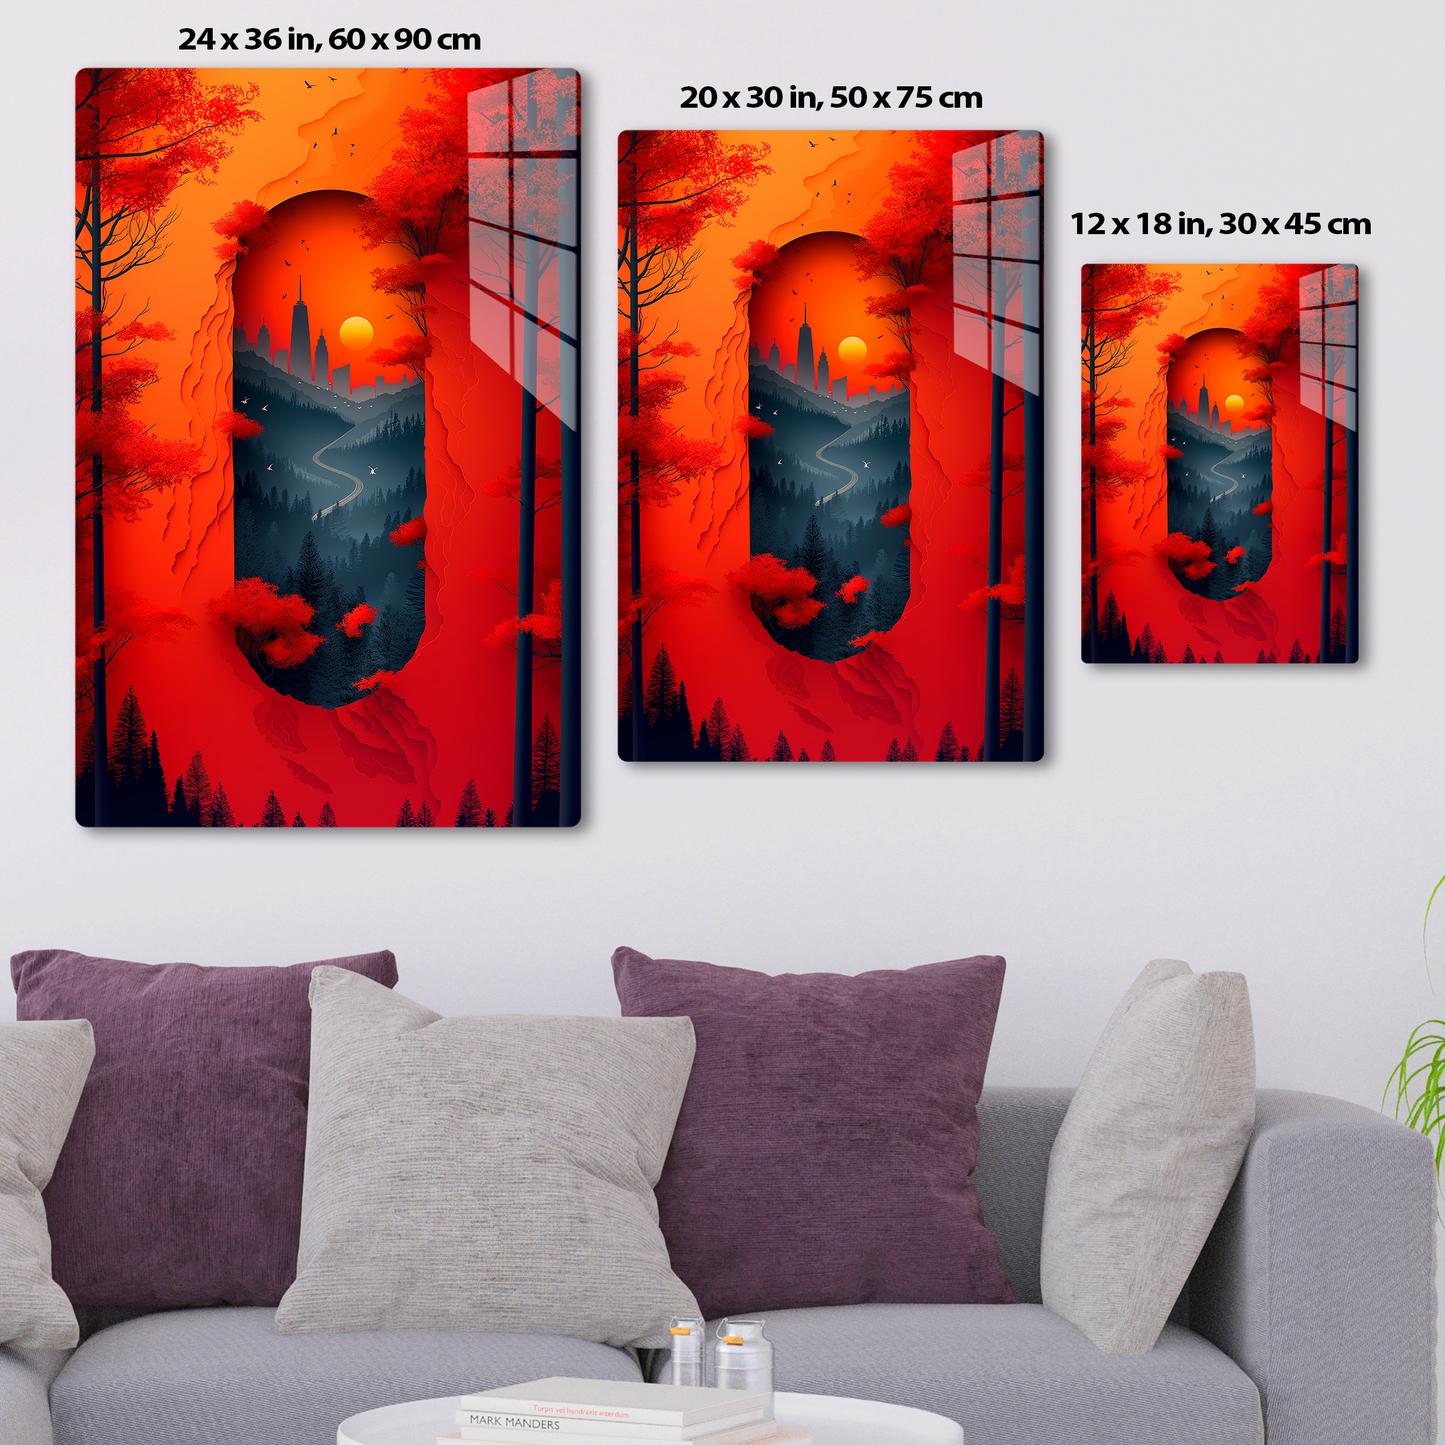 Red Leafy Cityscape (Acrylic)Step into the universe with Red forest and castle Acrylic art from RimaGallery. Experience the cosmos in your home with vibrant, ethically crafted art. Free shippingRimaGallery